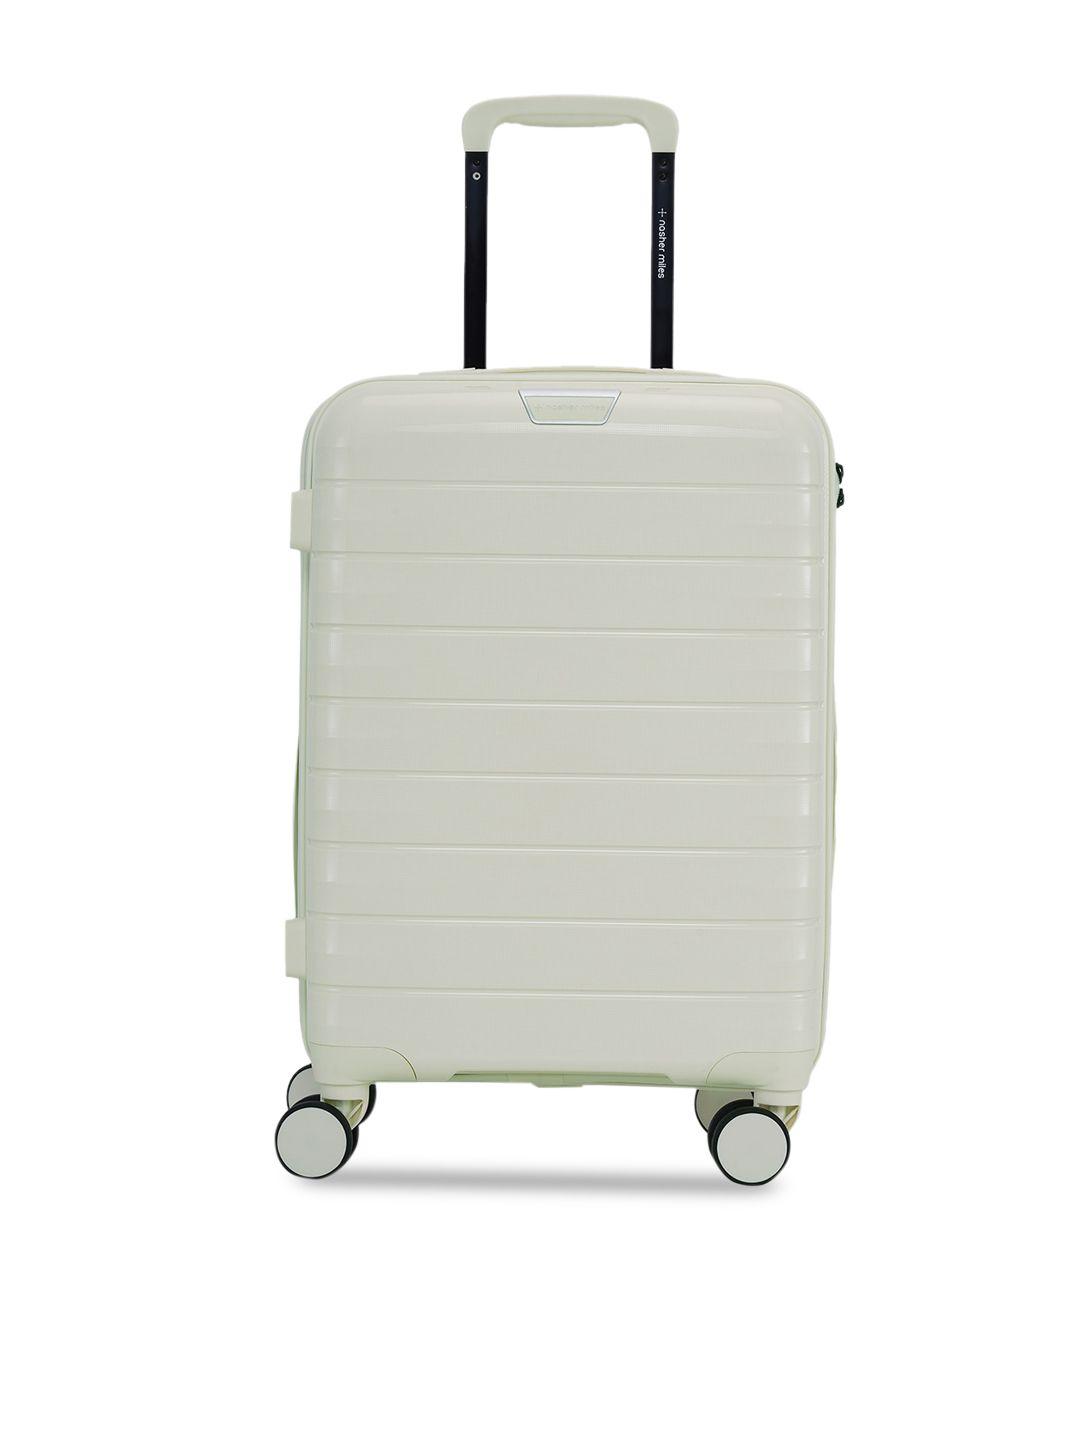 nasher miles vienna water resistance hard-sided cabin trolley suitcase